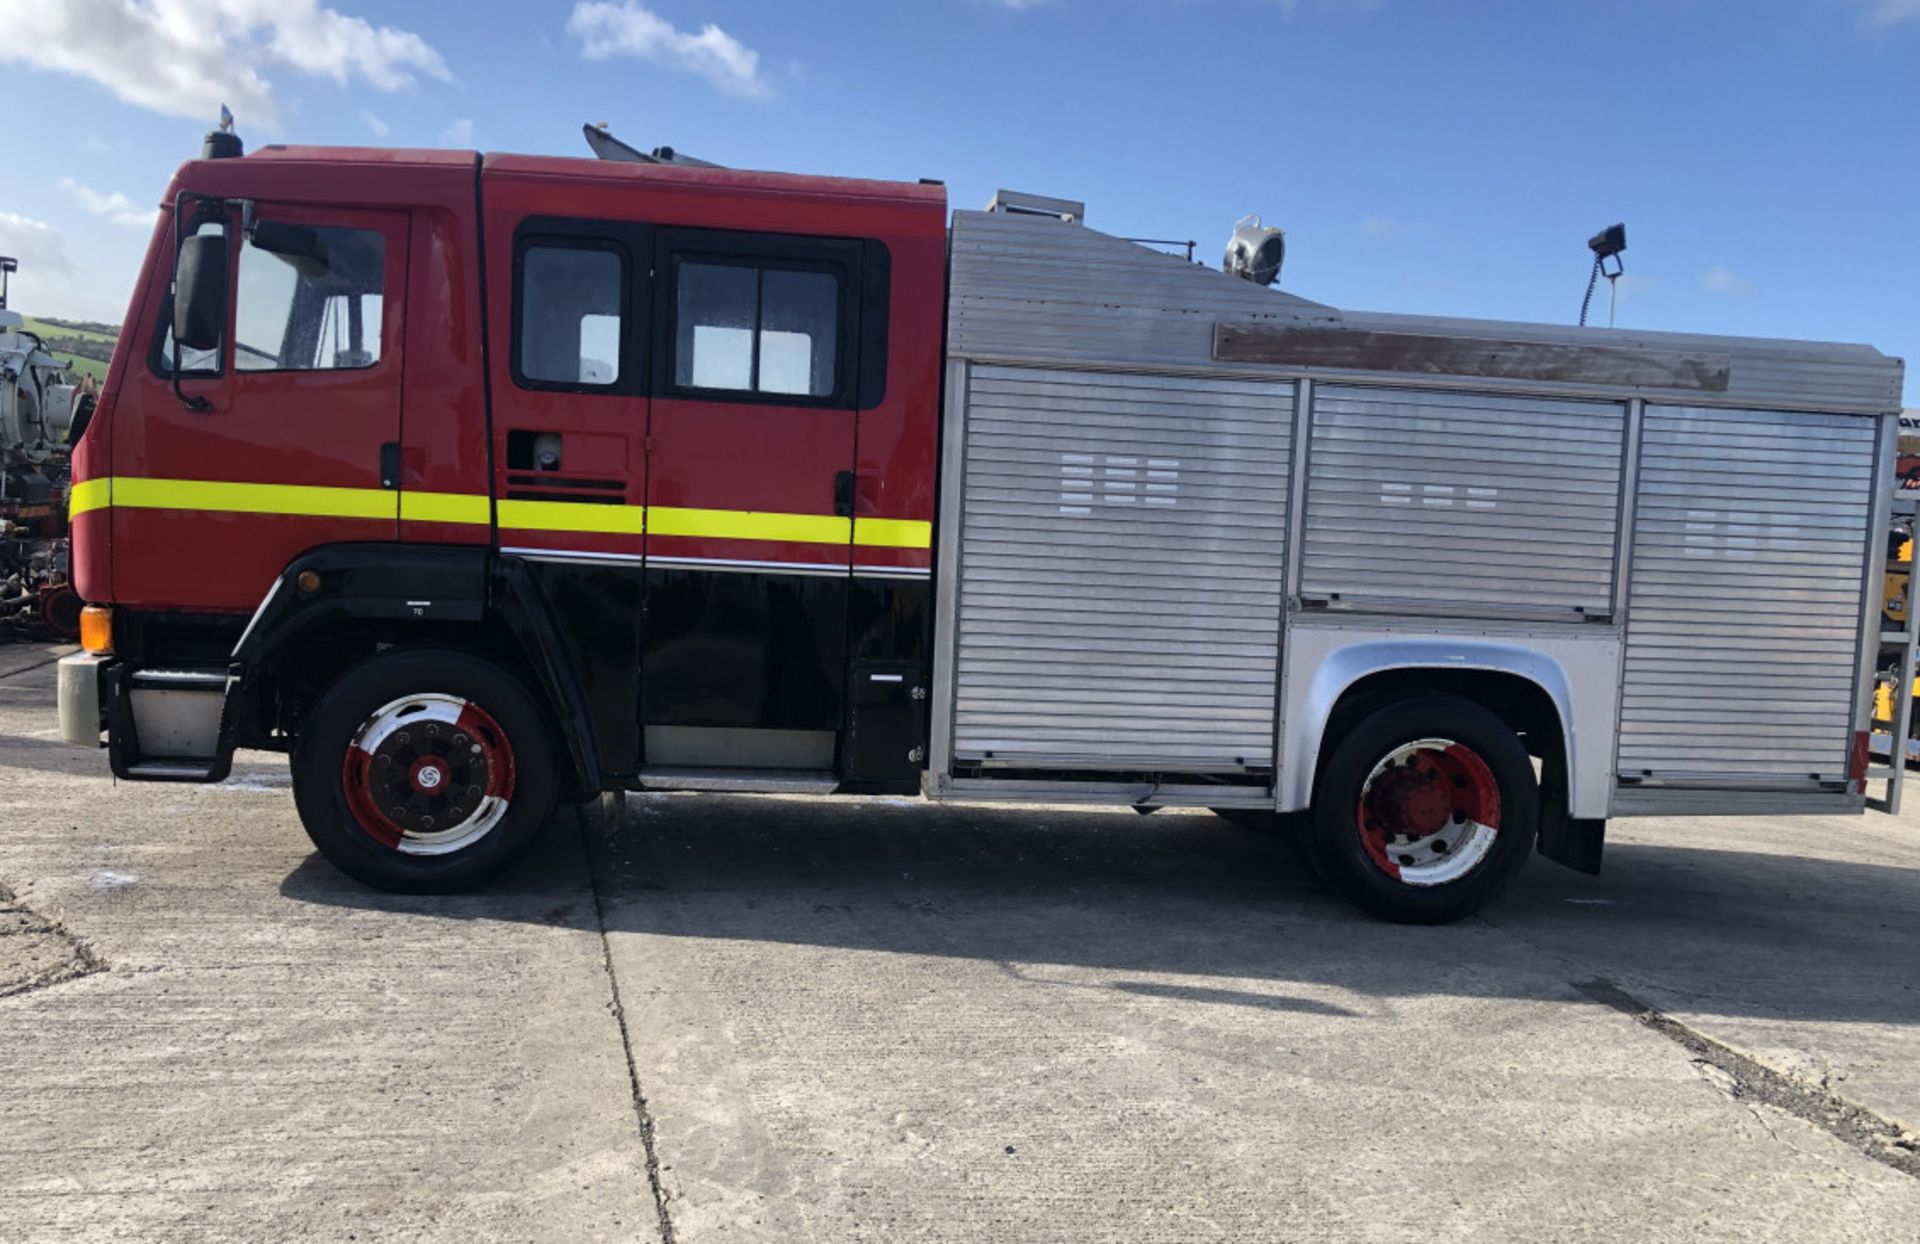 LEYLAND FRIEGHTER 1718 FIRE TENDER TRUCK - Image 2 of 11